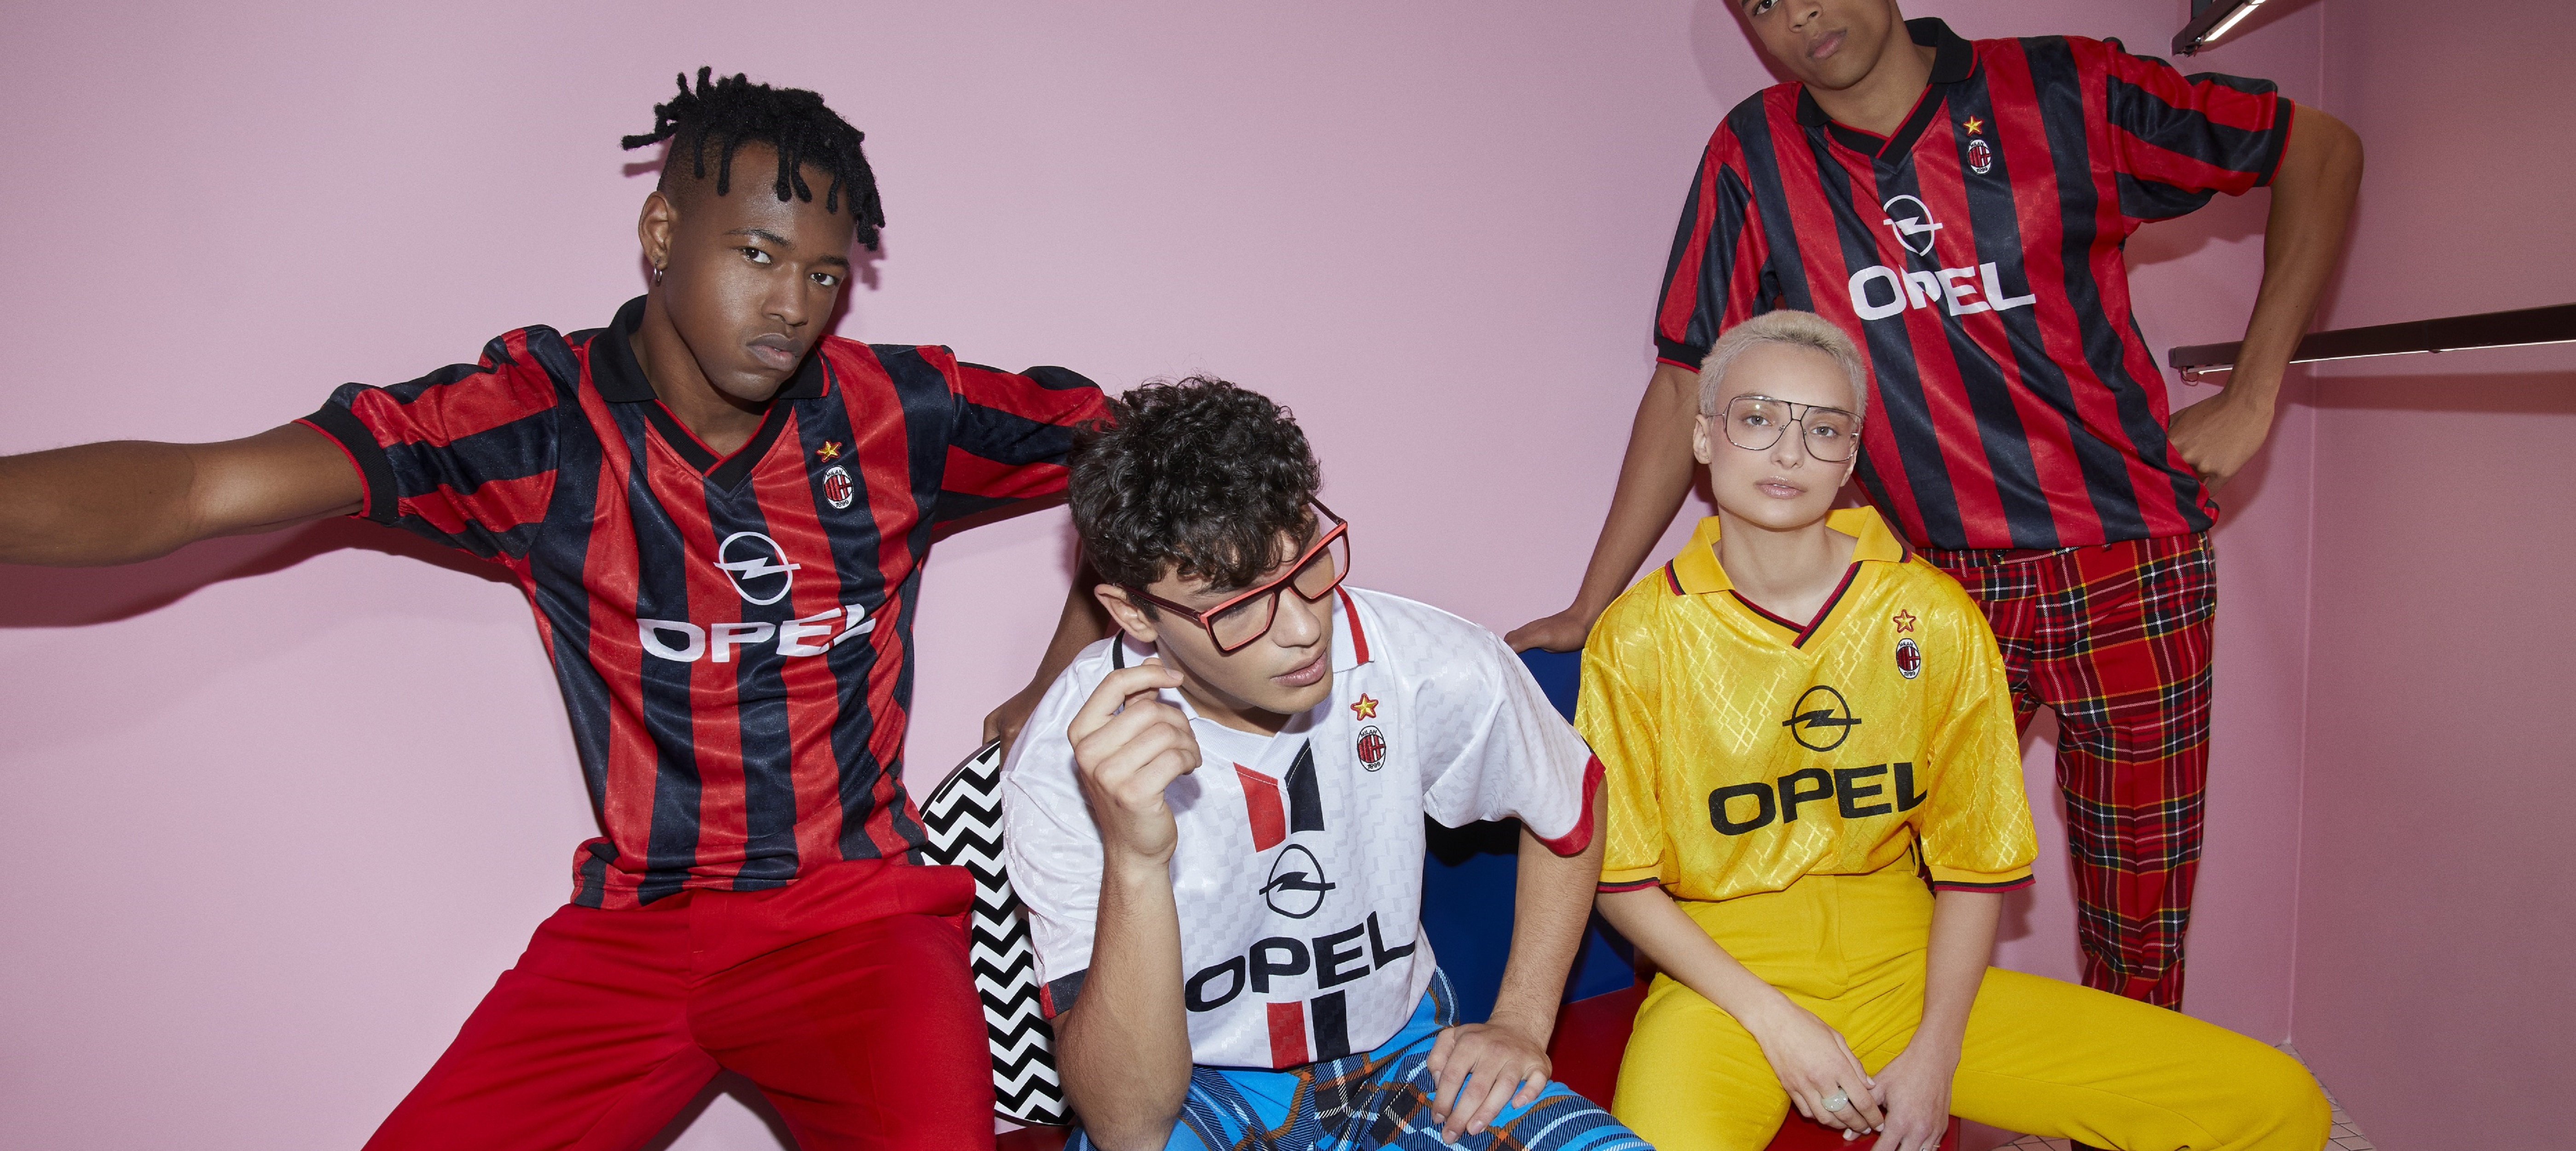 AC Milan on X: The Off-White™ and #ACMilan partnership is a call